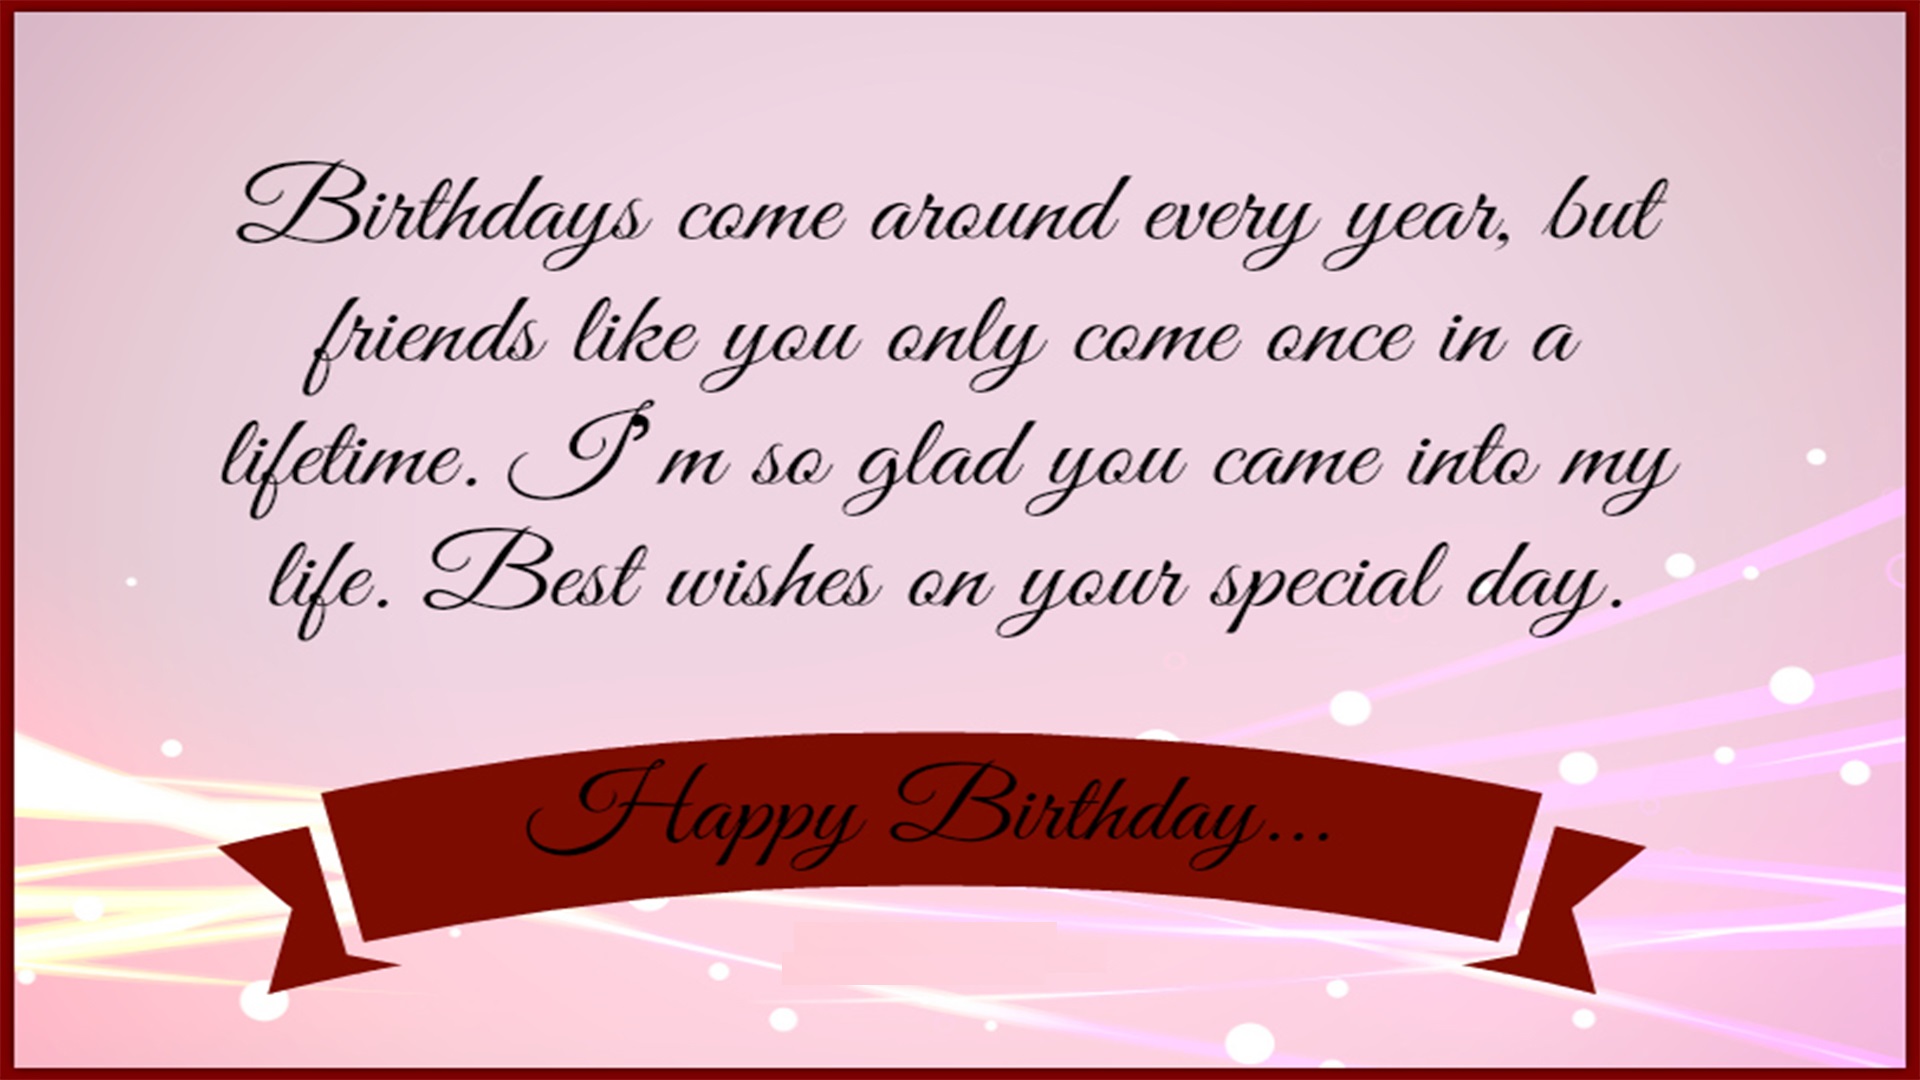 birthday wishes quotes image